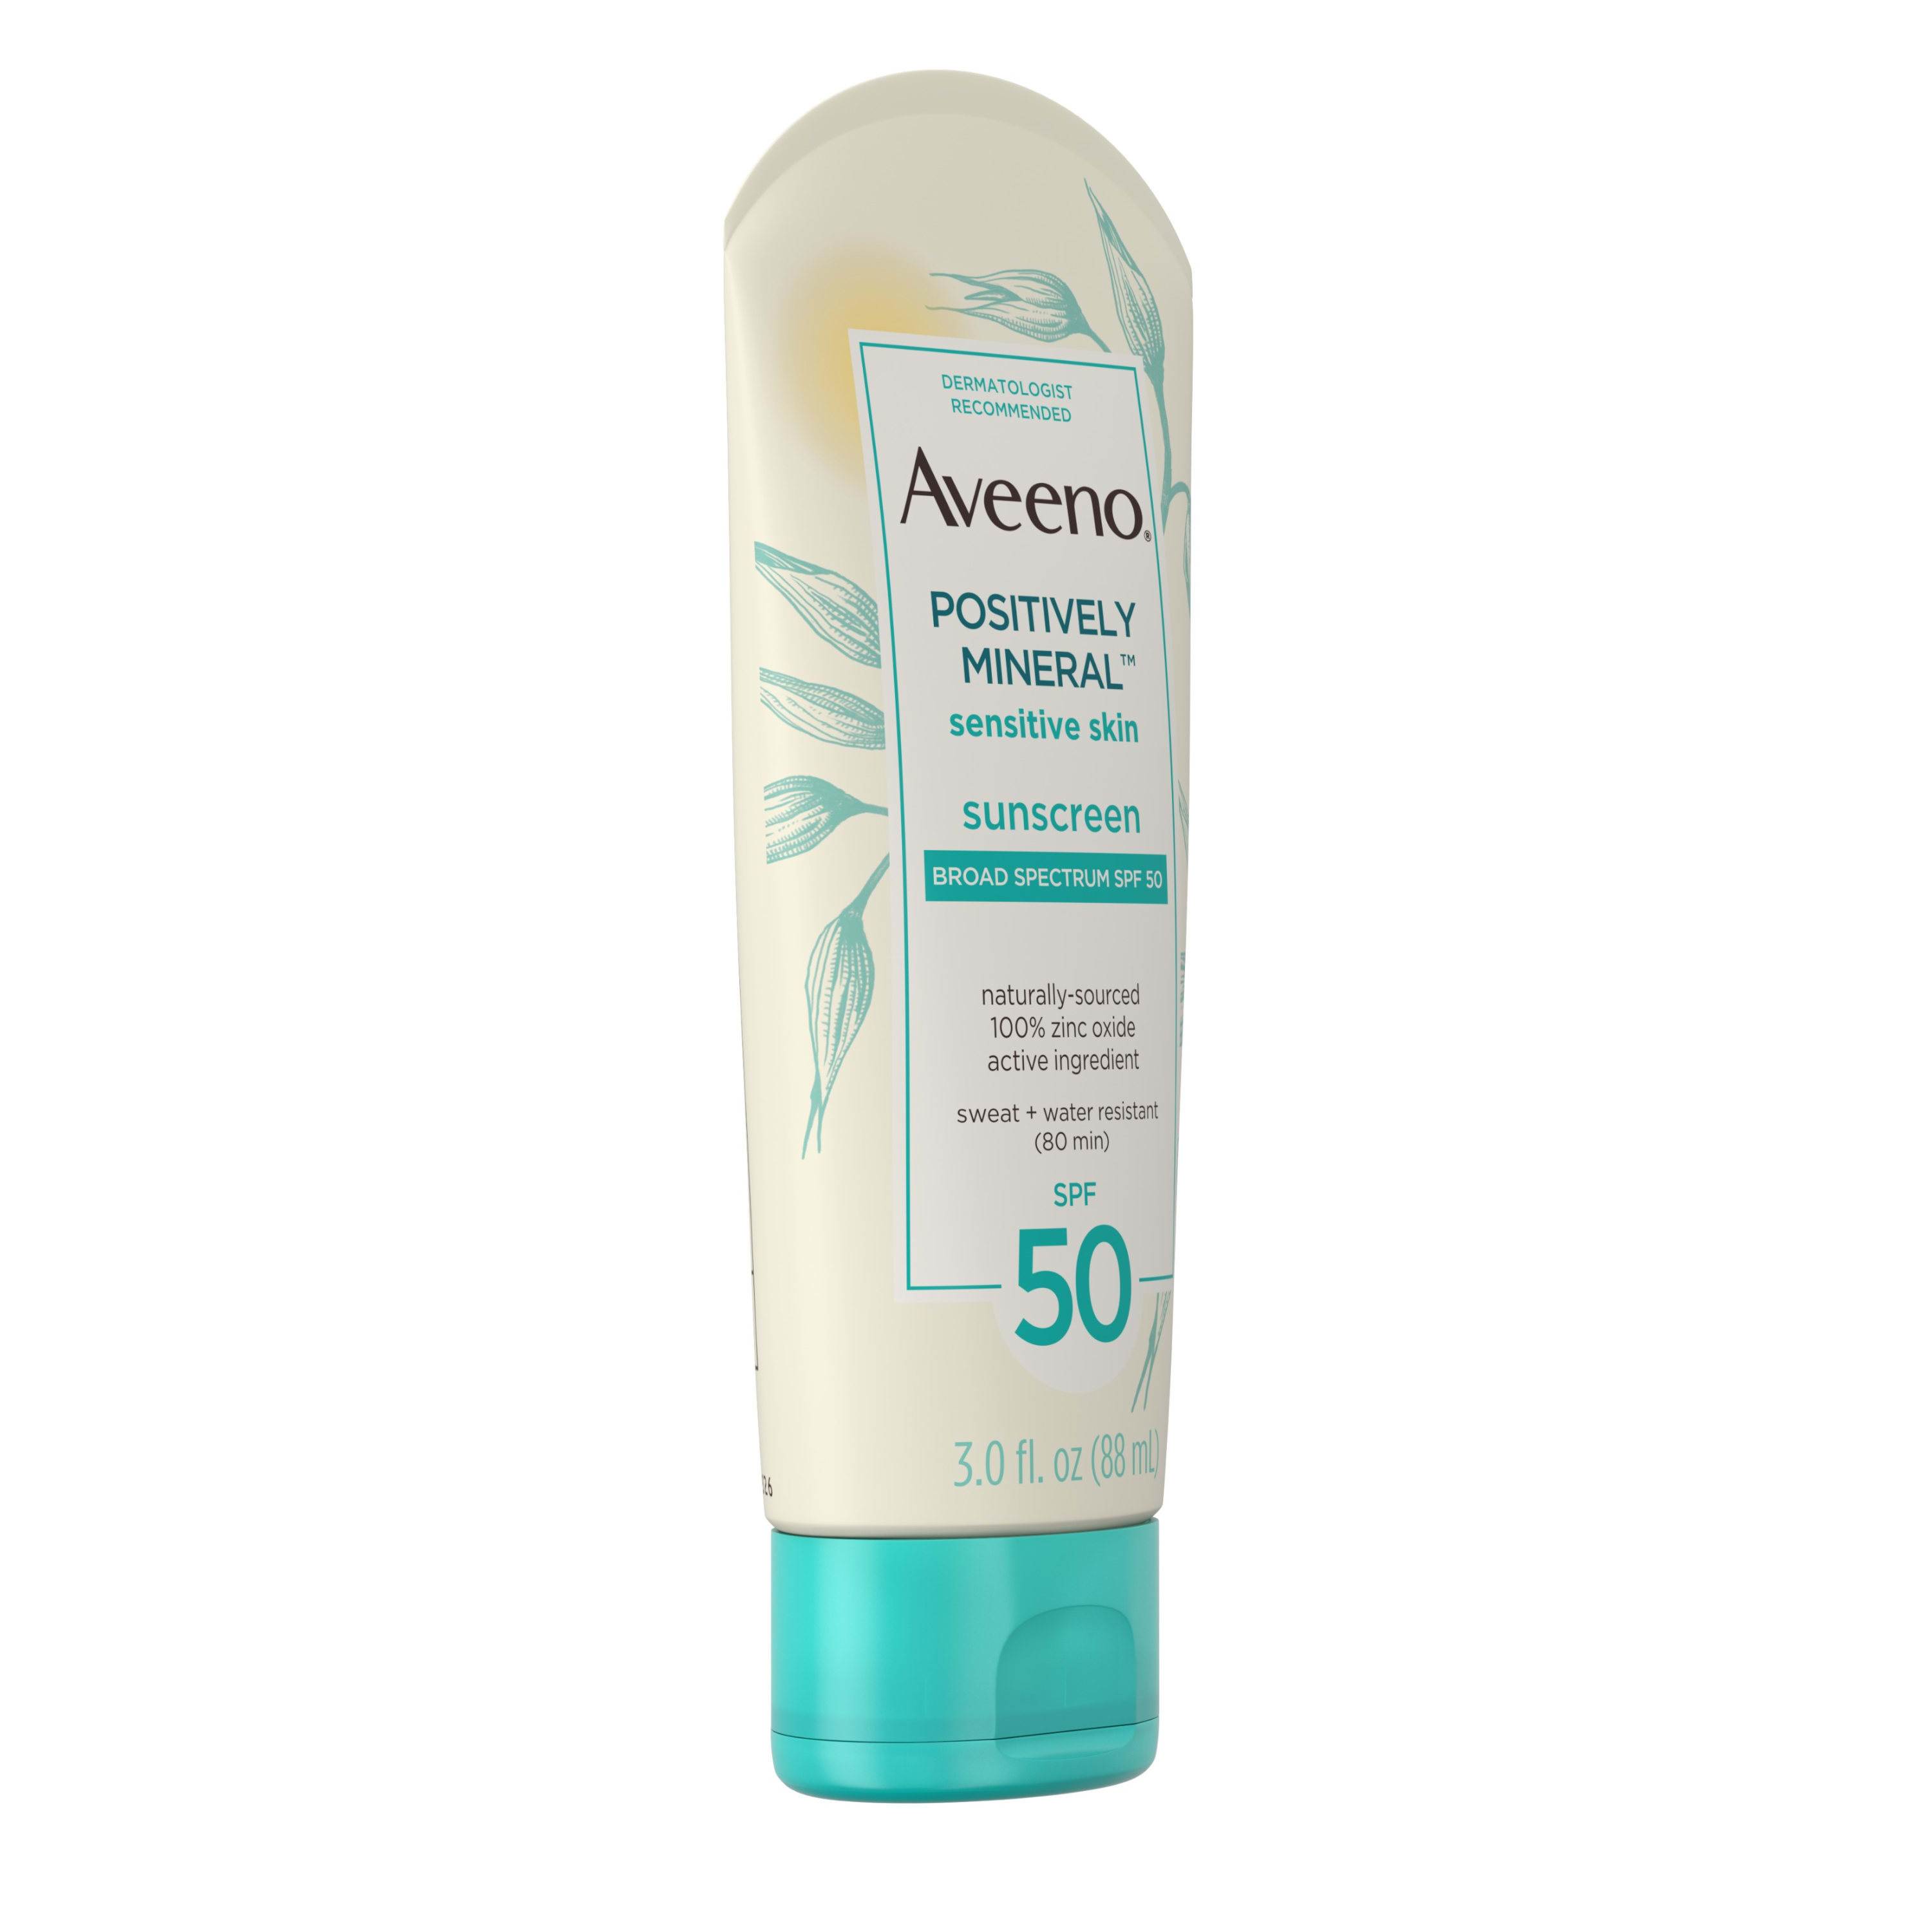 Aveeno Positively Mineral Sensitive Sunscreen Lotion SPF 50, 3 fl. oz - image 11 of 16